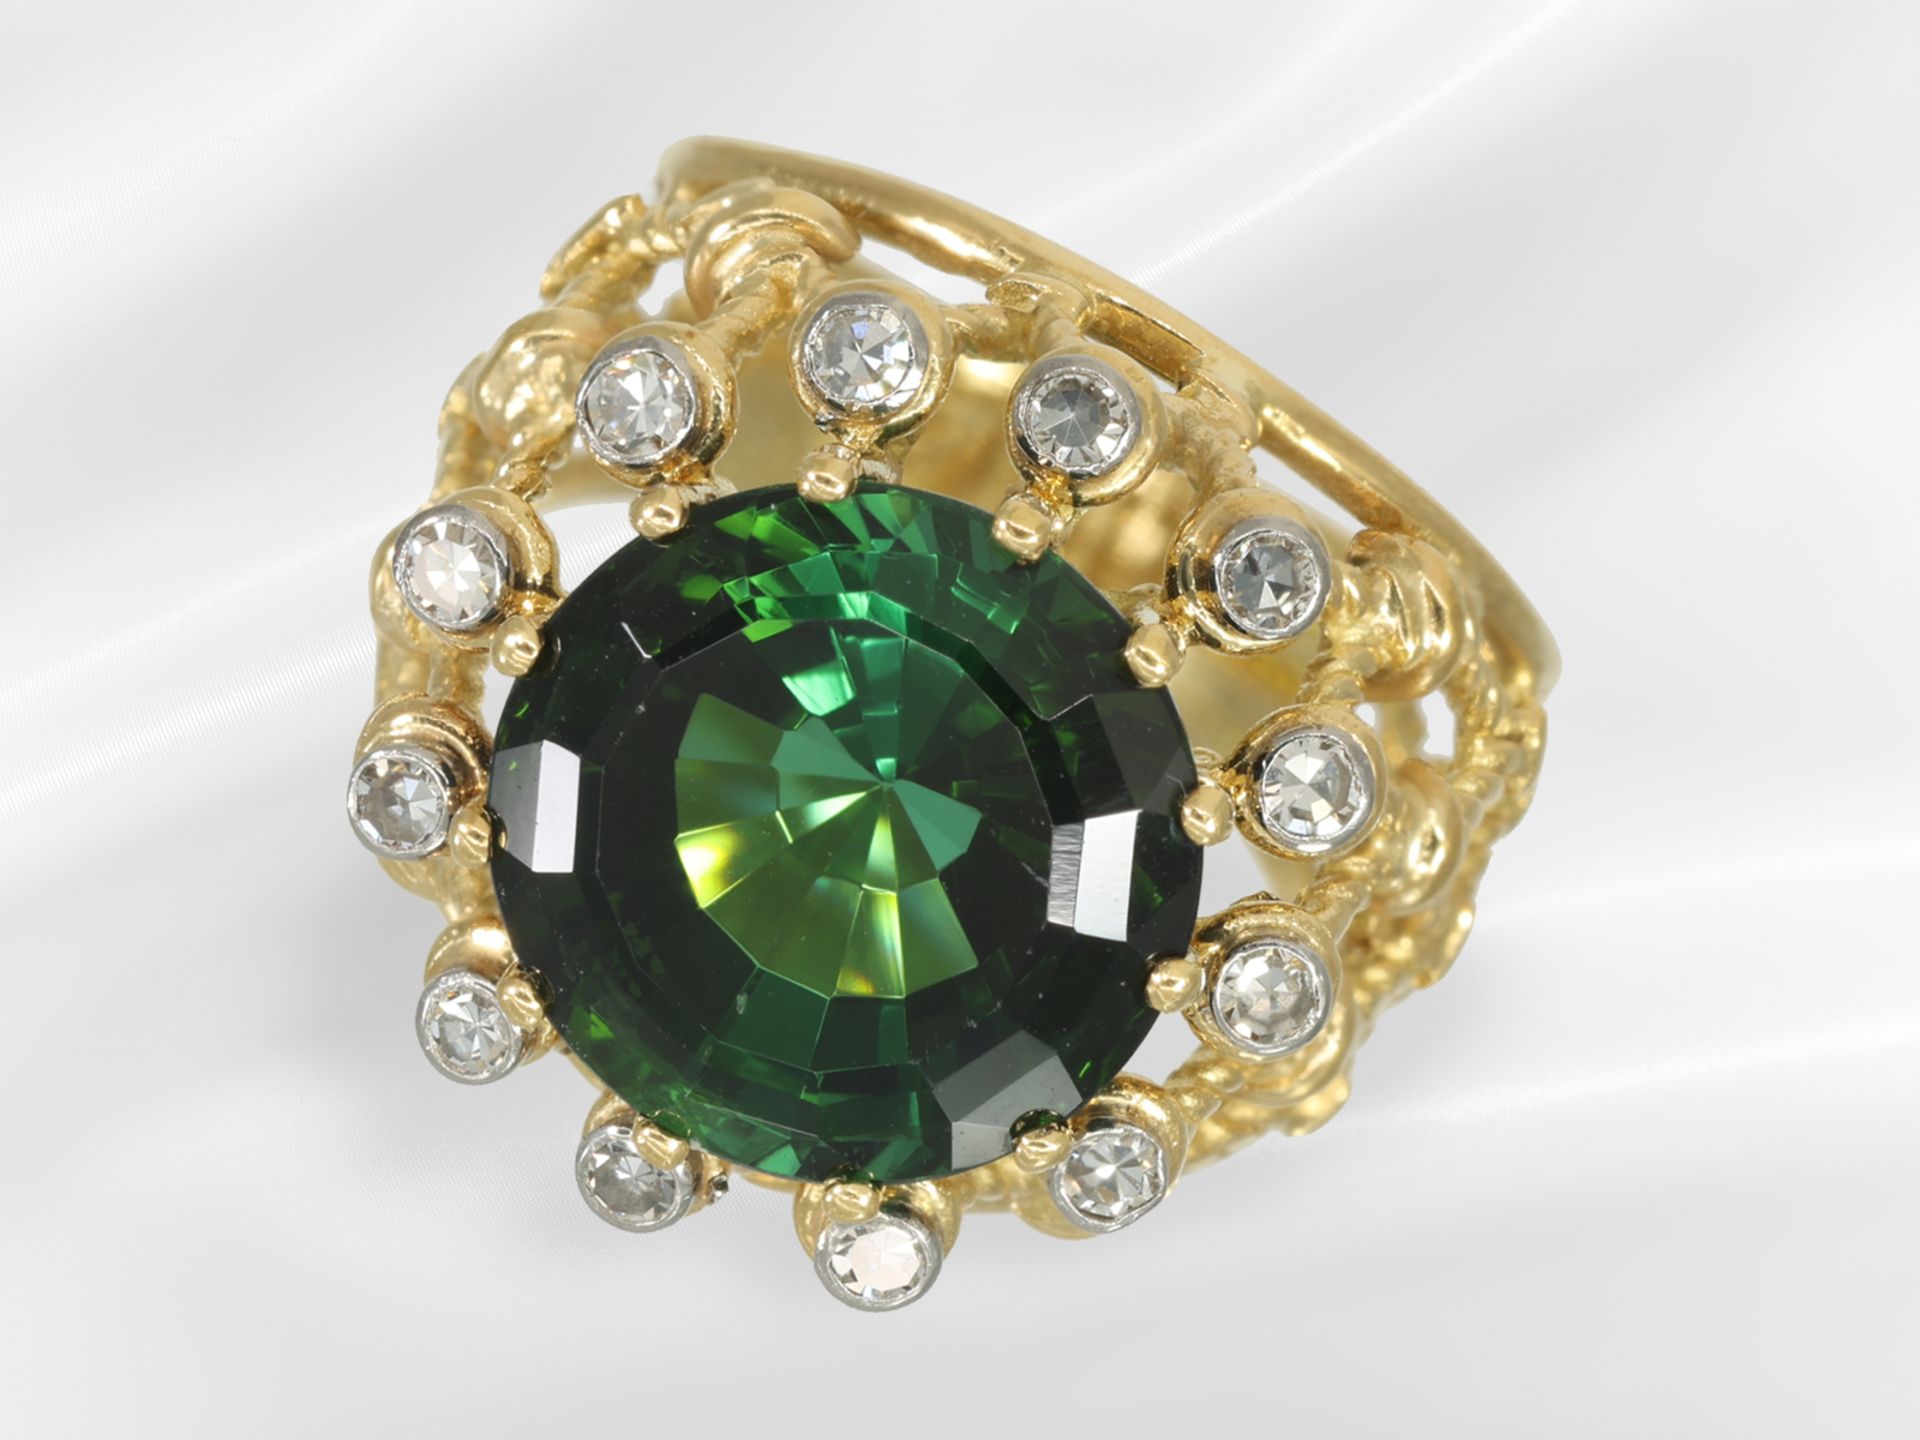 Ring: very decoratively crafted vintage goldsmith ring with a large tourmaline of approx. 7.3ct